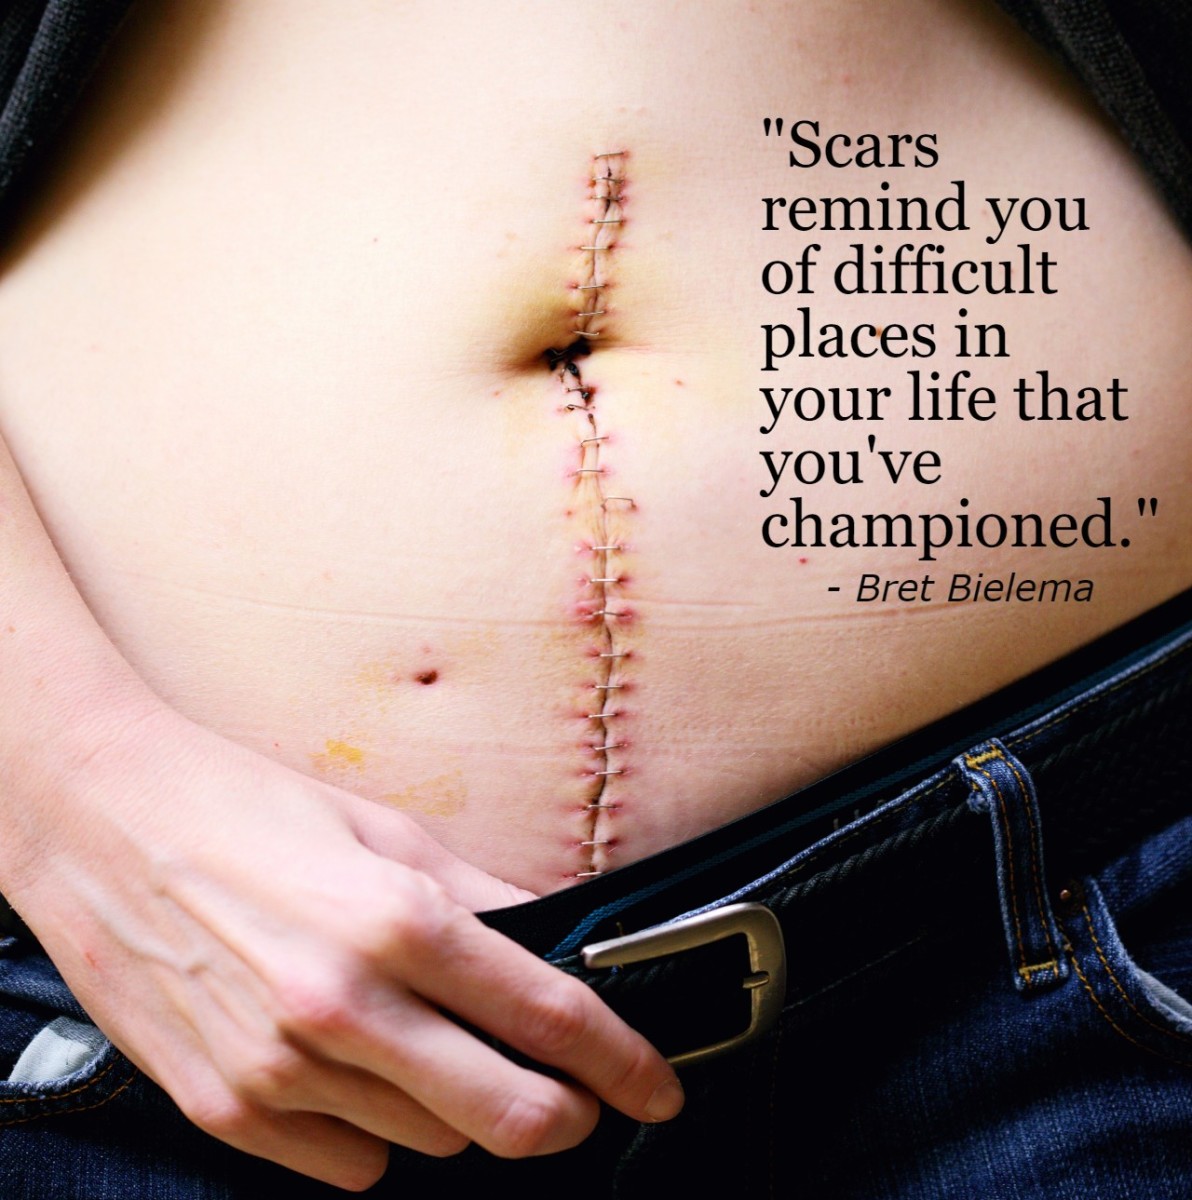 "Scars remind you of difficult places in your life that you've championed." - Bret Bielema, American football coach